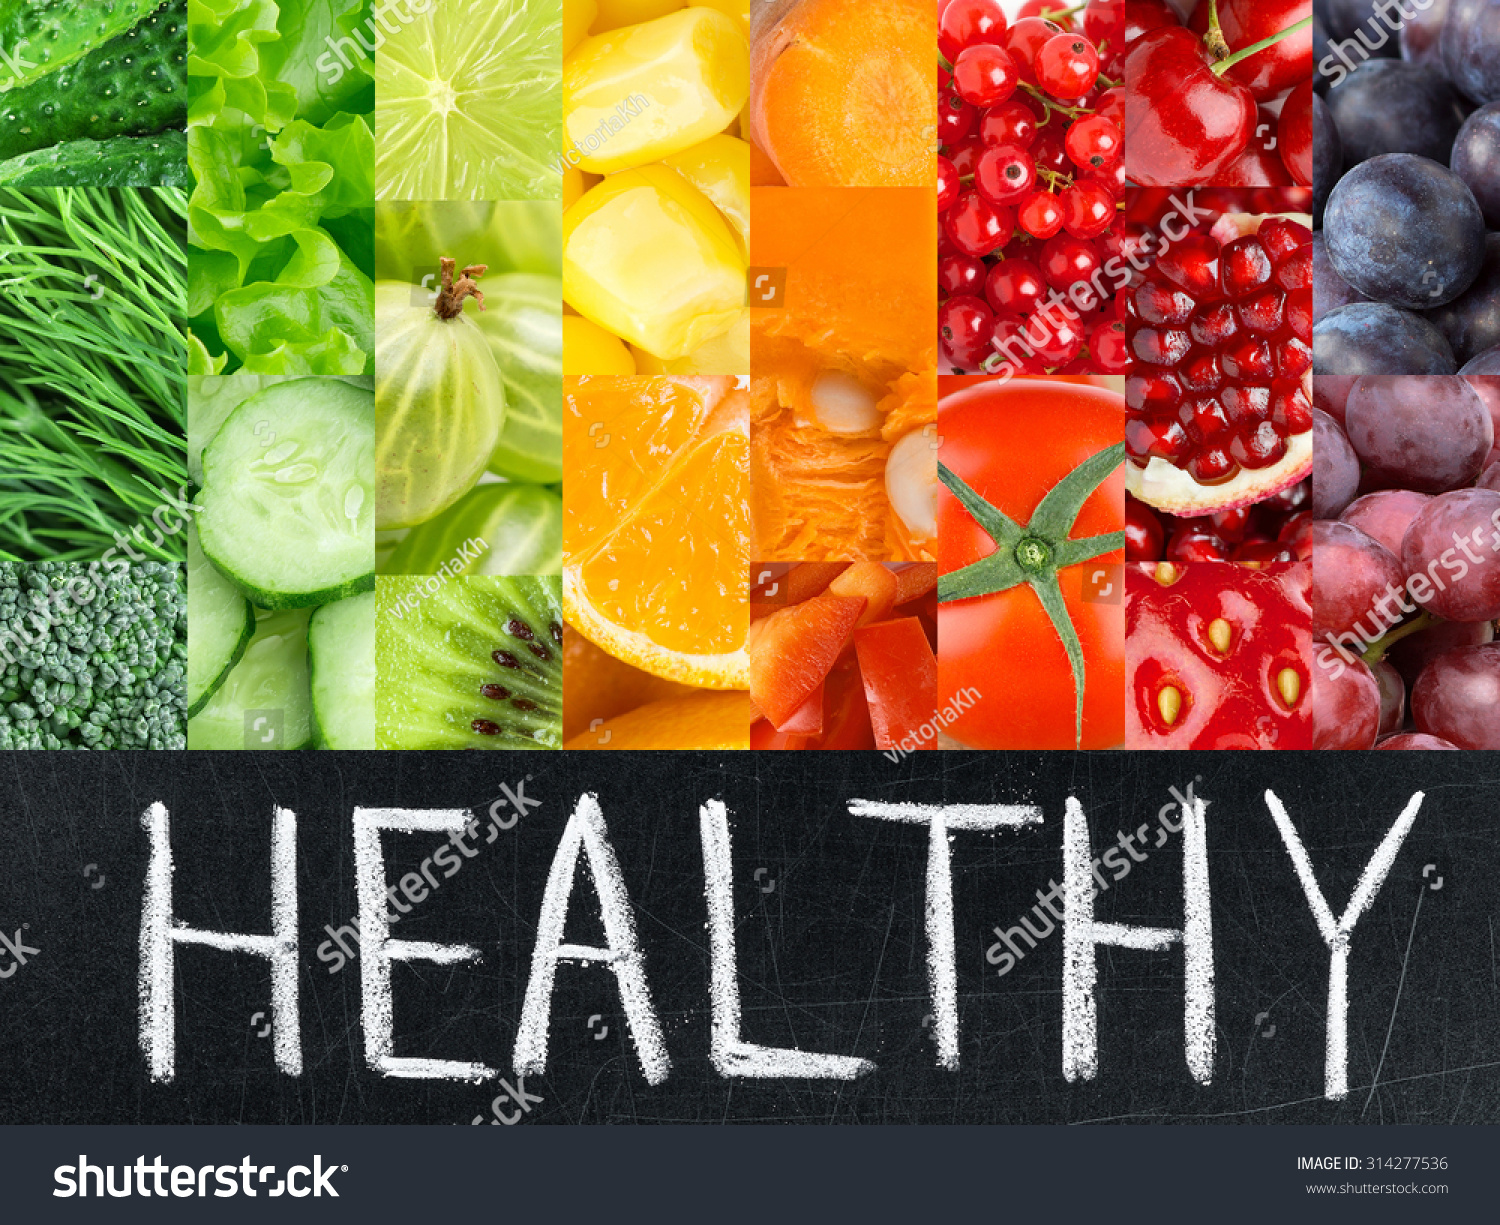 Healthy fresh color food. Fruits and vegetables concept #314277536